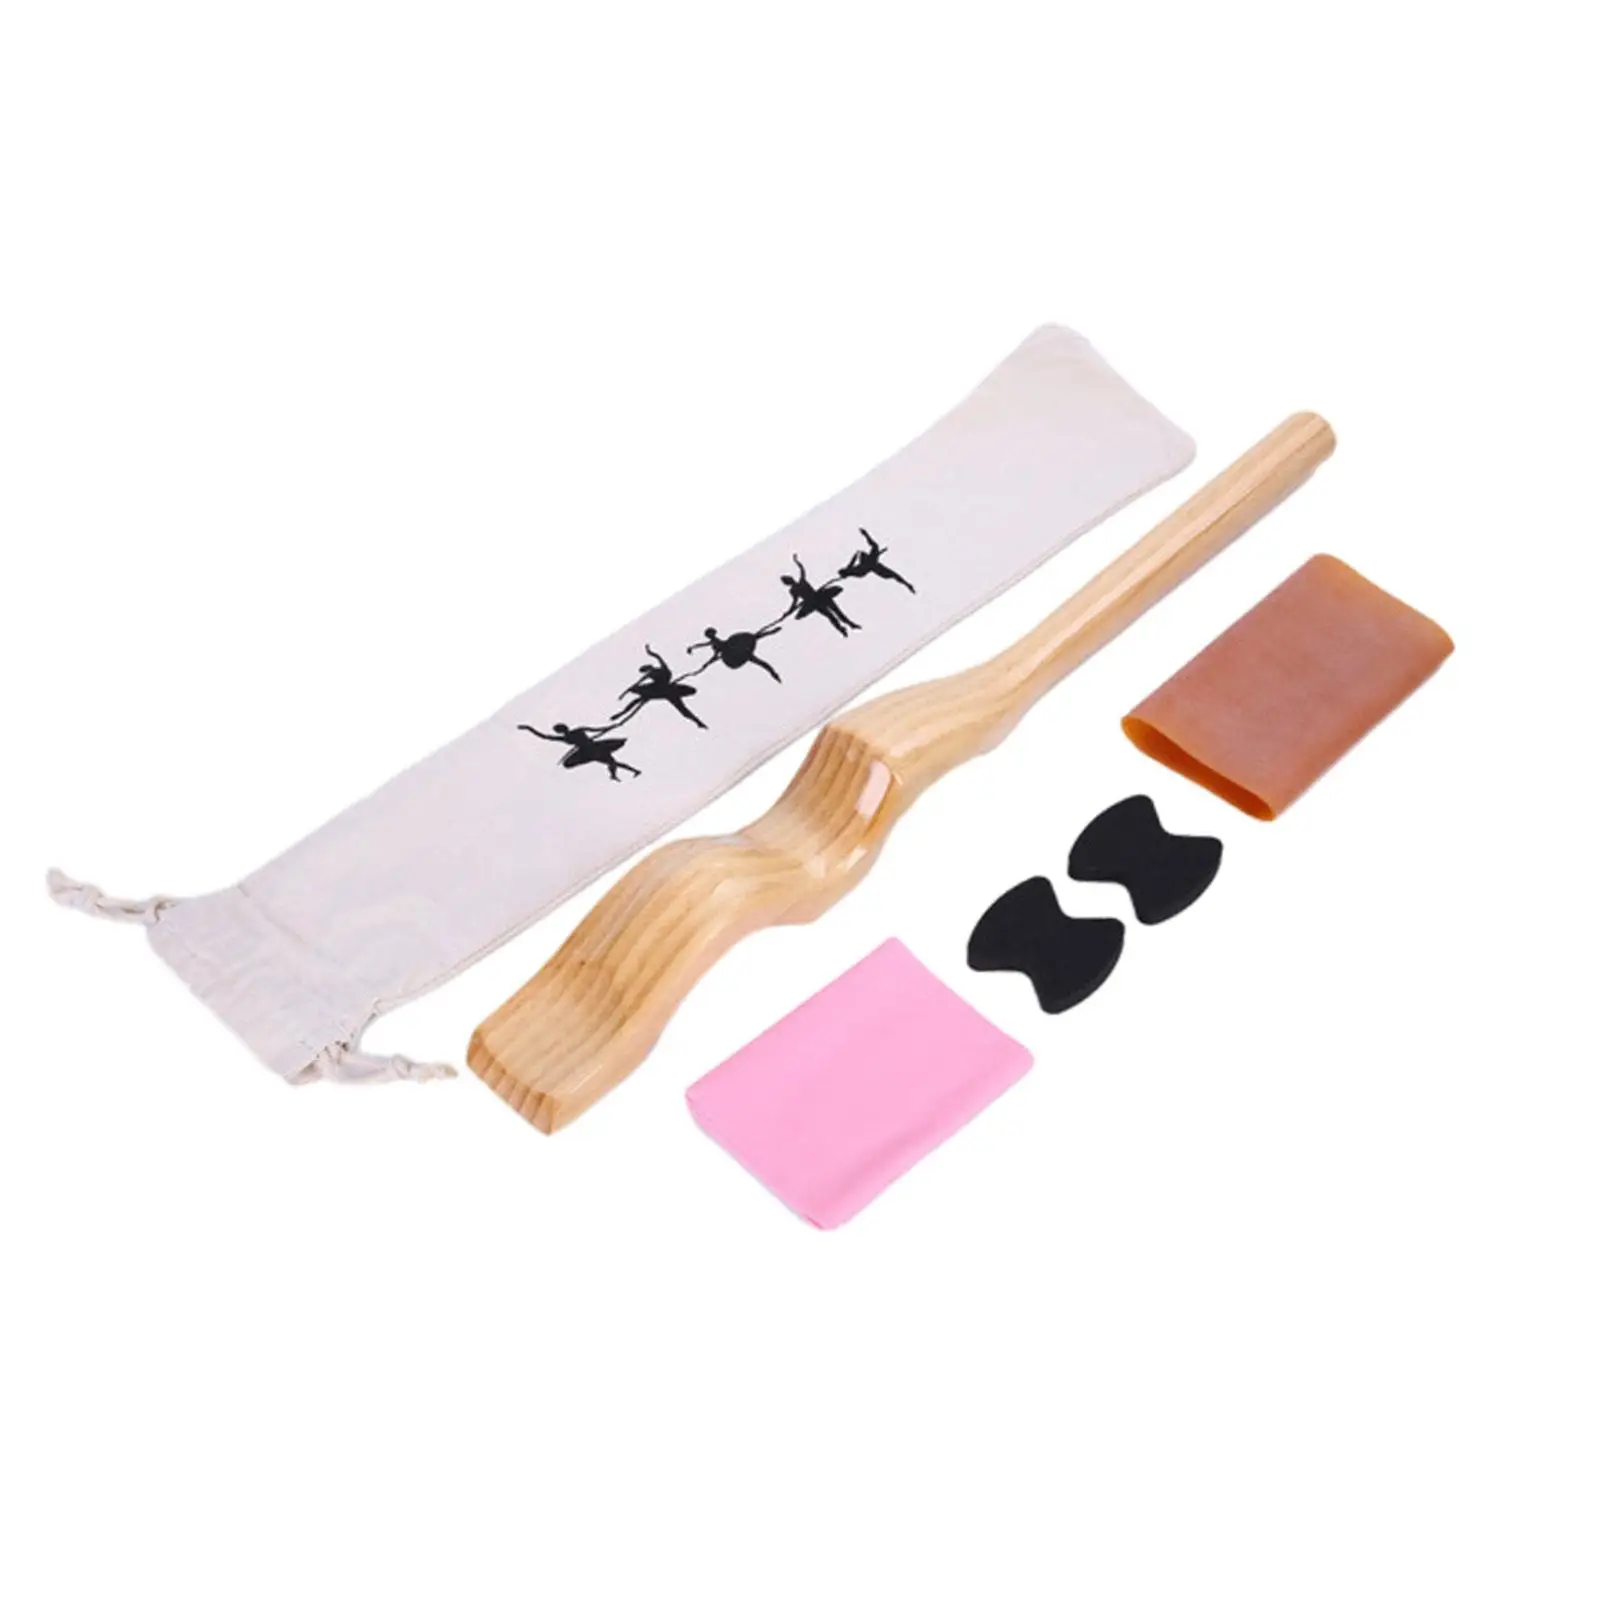 

Ballet Dance Foot Stretcher Wood Ballet Accessory with Elastic Band and Carry Bag Set for Gymnastics Ballet Dancer Yoga People